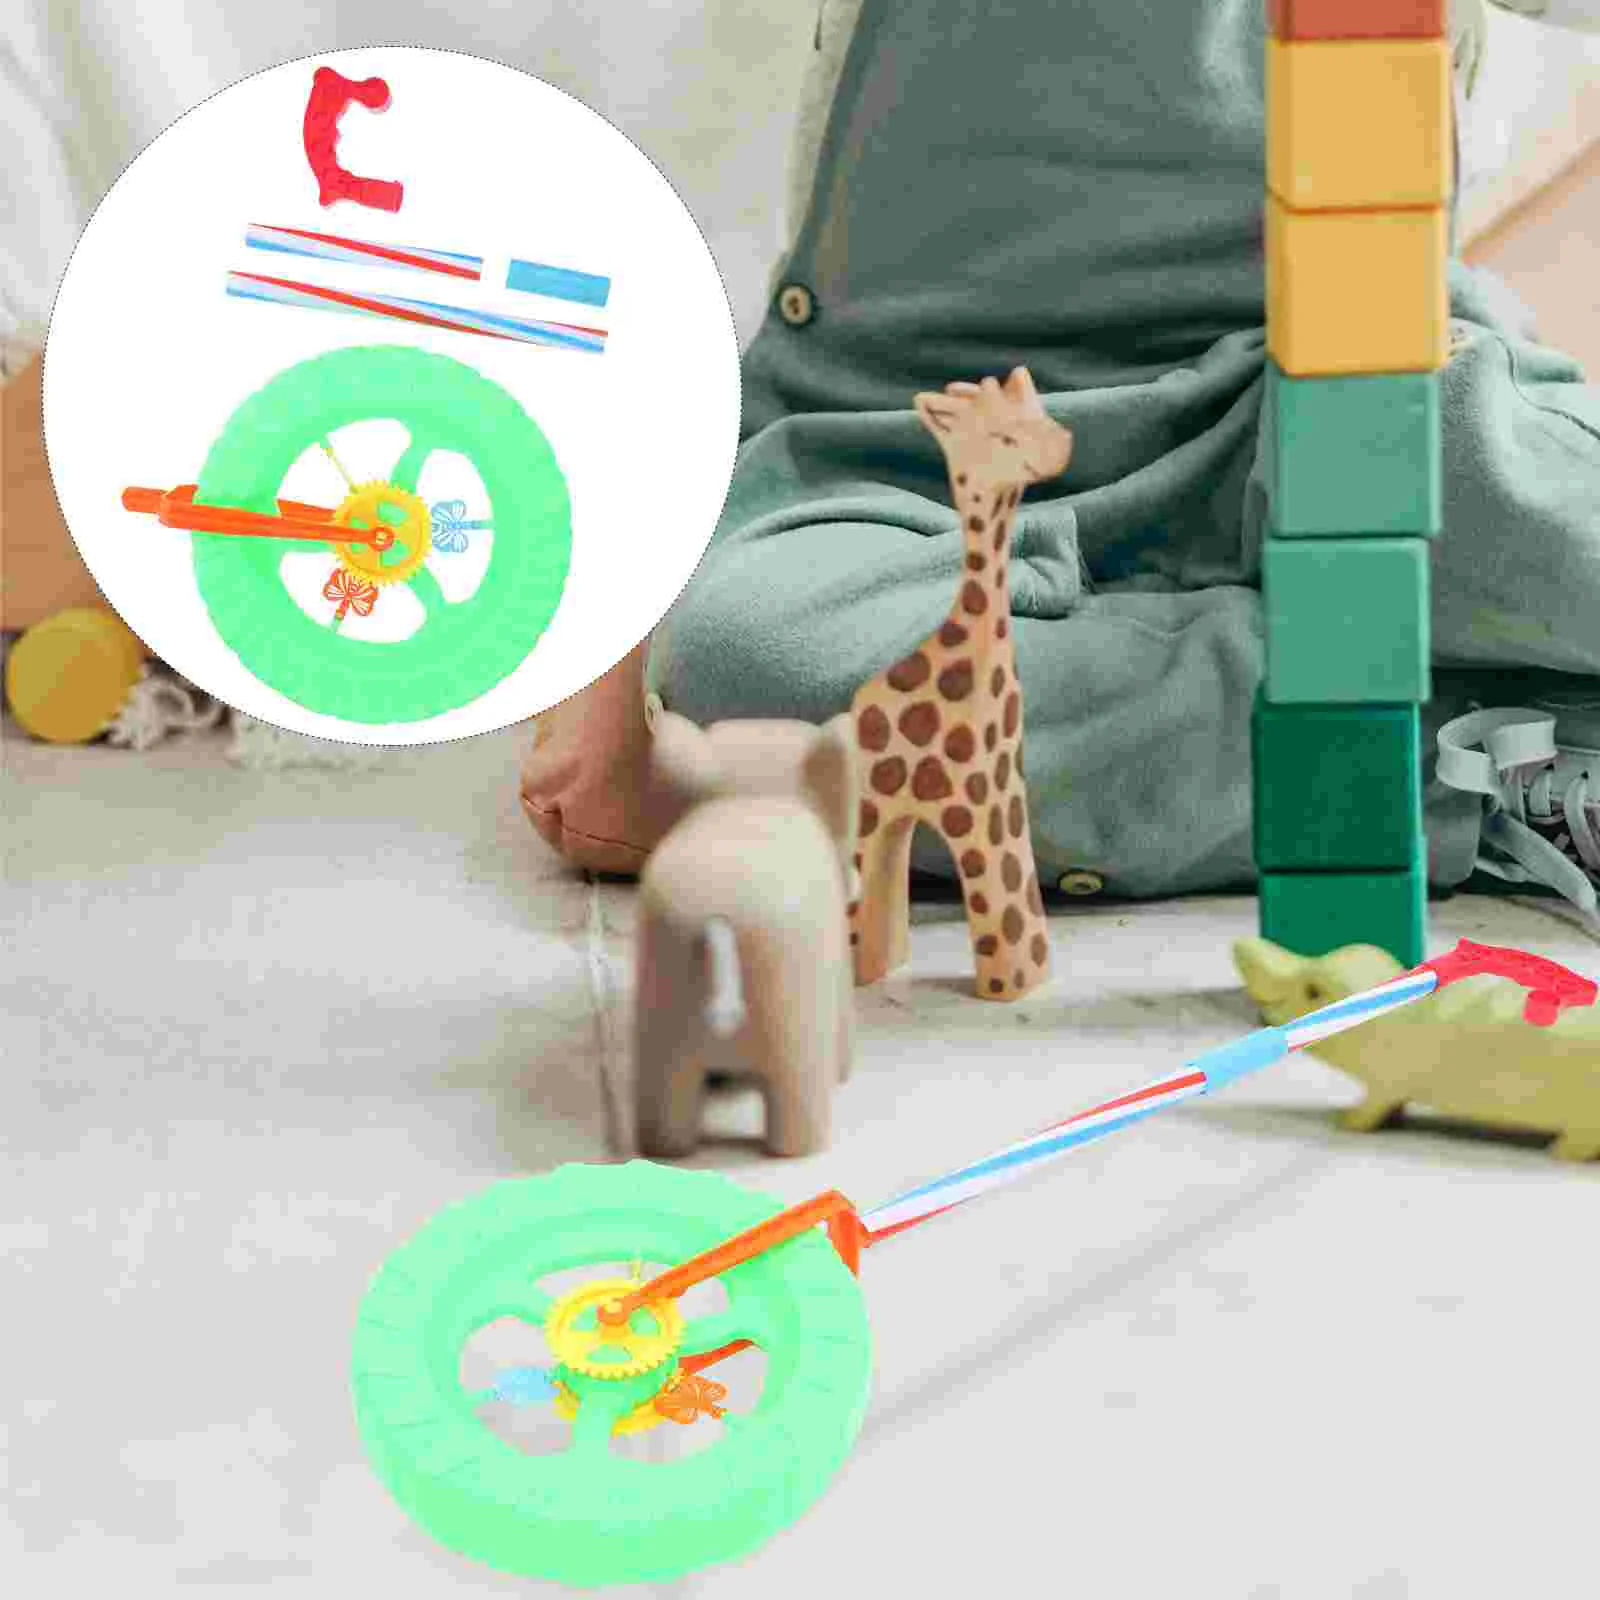 

Toddler Stroller Plastic Baby Walker Learning Push Kids Airplane Toy Wheels Educational Plaything Pull Pvc Playes